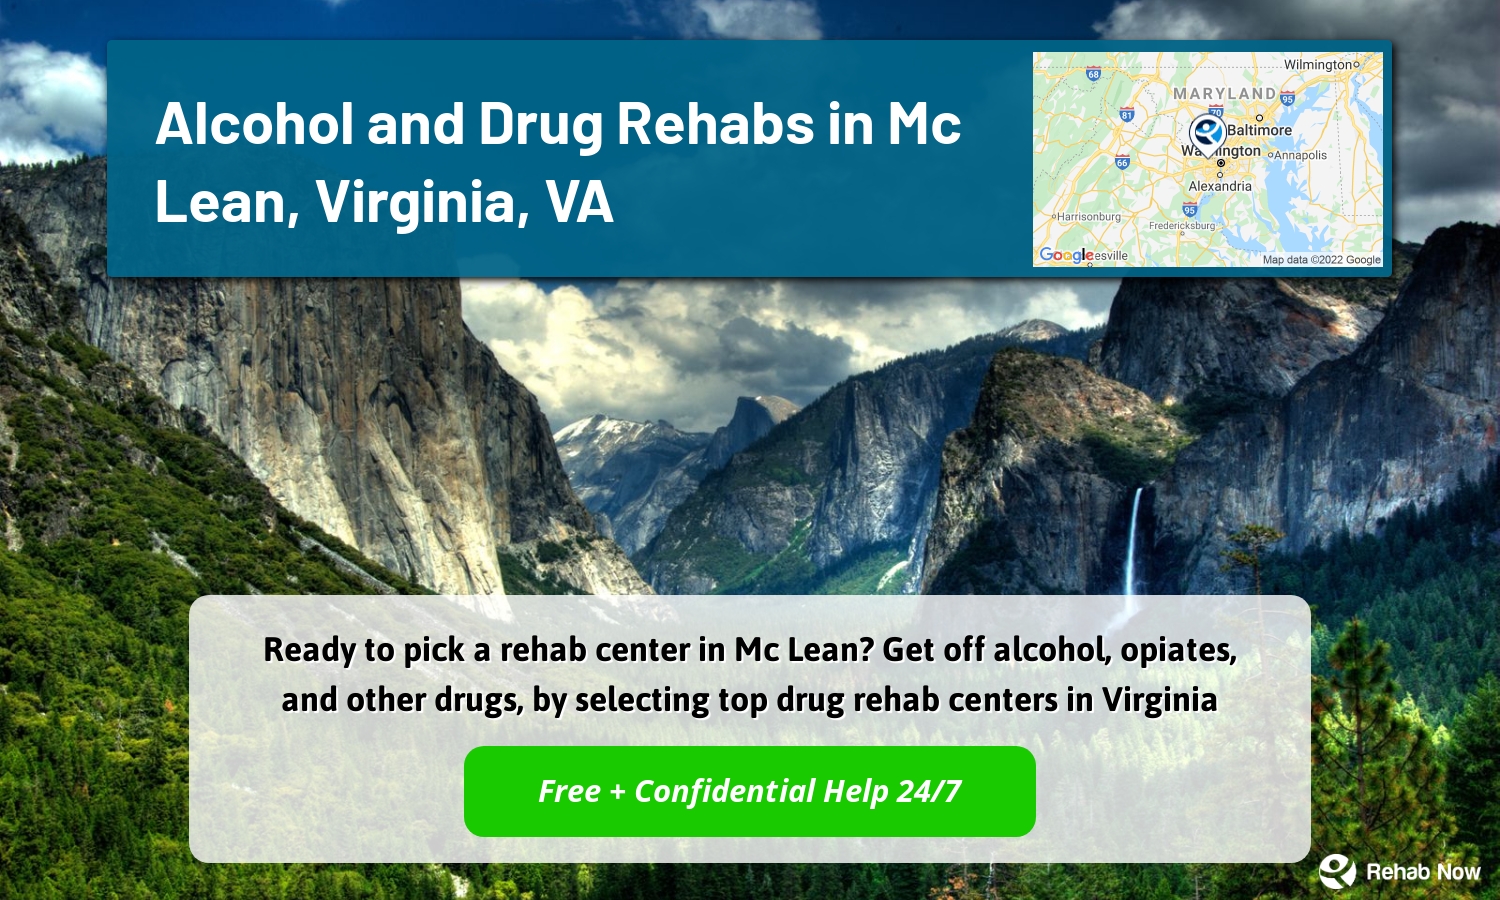 Ready to pick a rehab center in Mc Lean? Get off alcohol, opiates, and other drugs, by selecting top drug rehab centers in Virginia